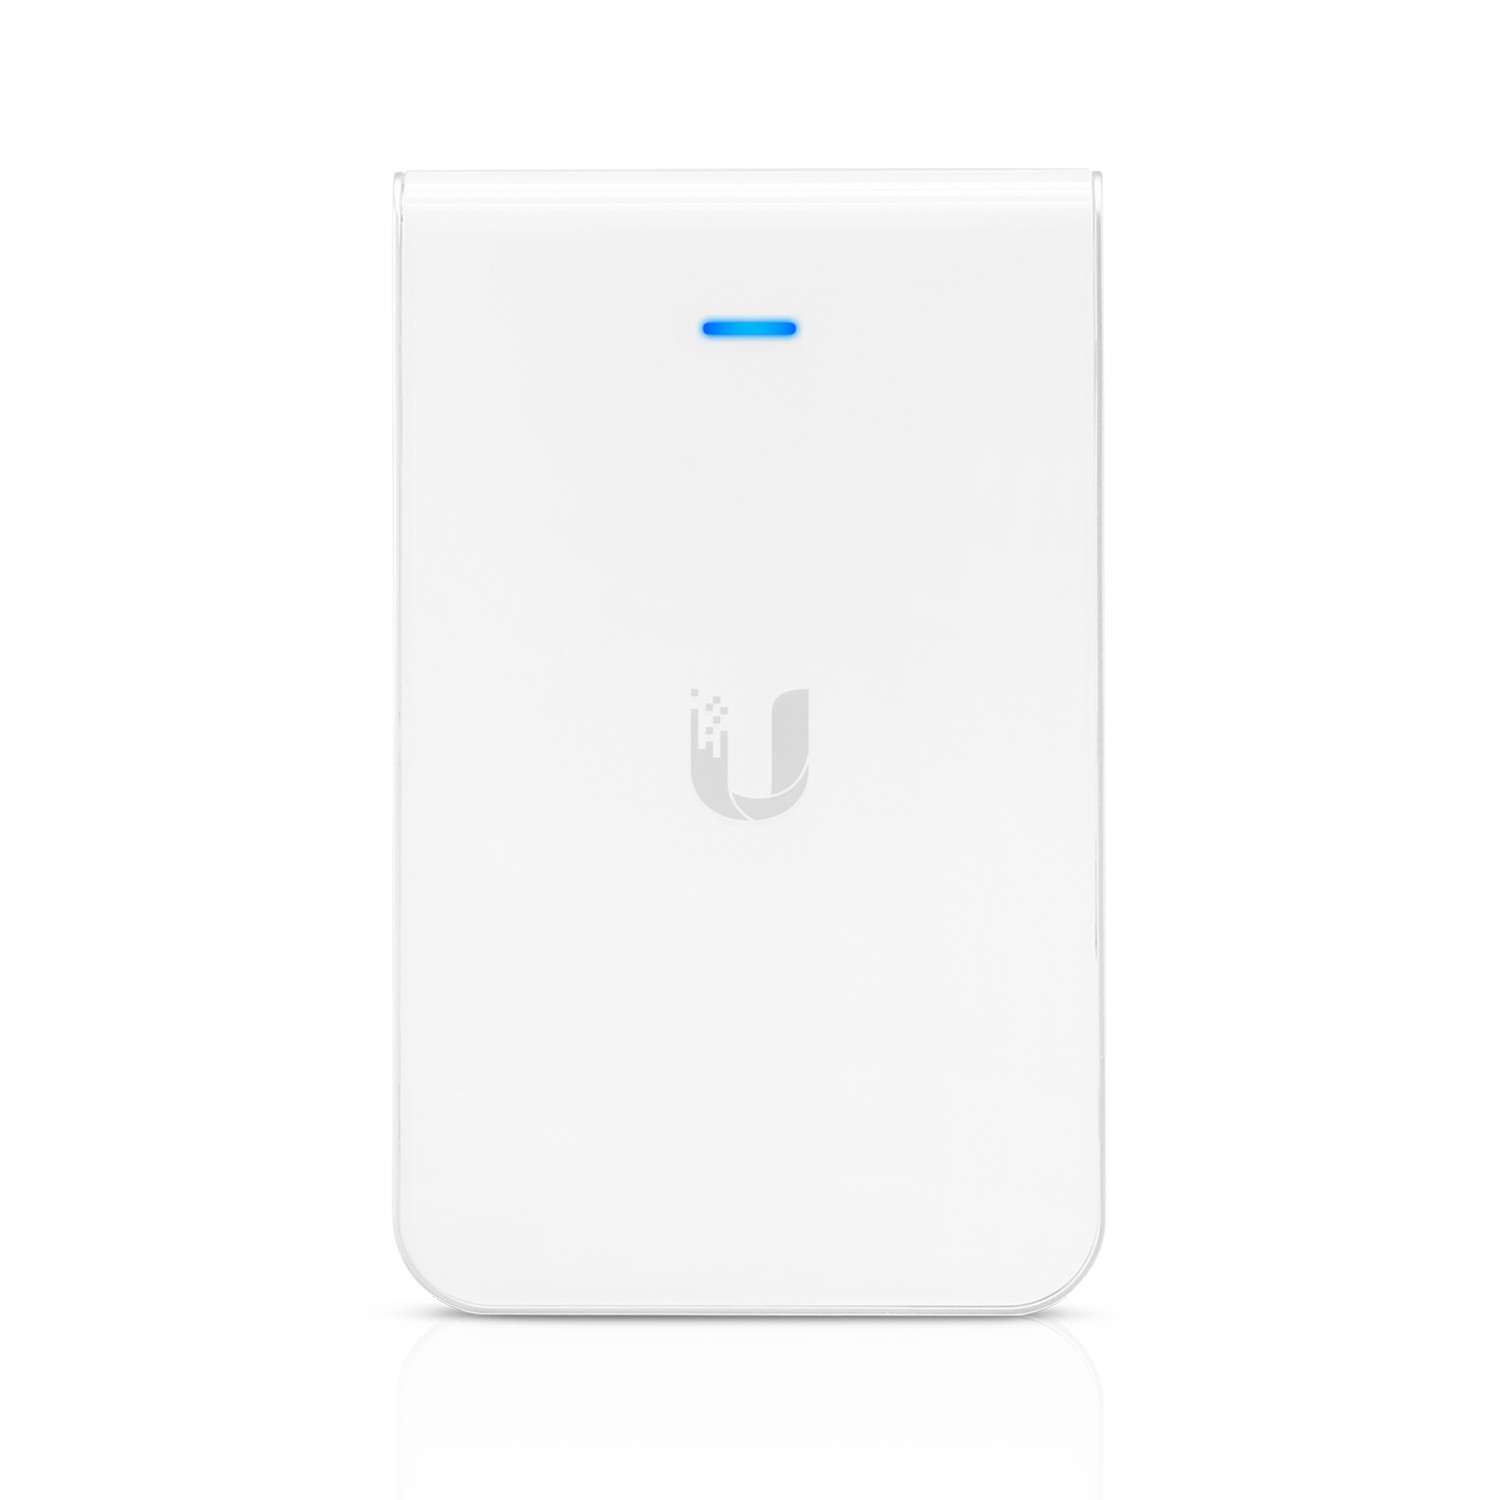 Thiết Bị Phát Wifi Access Point AC In-Wall (UAP-AC-IW)